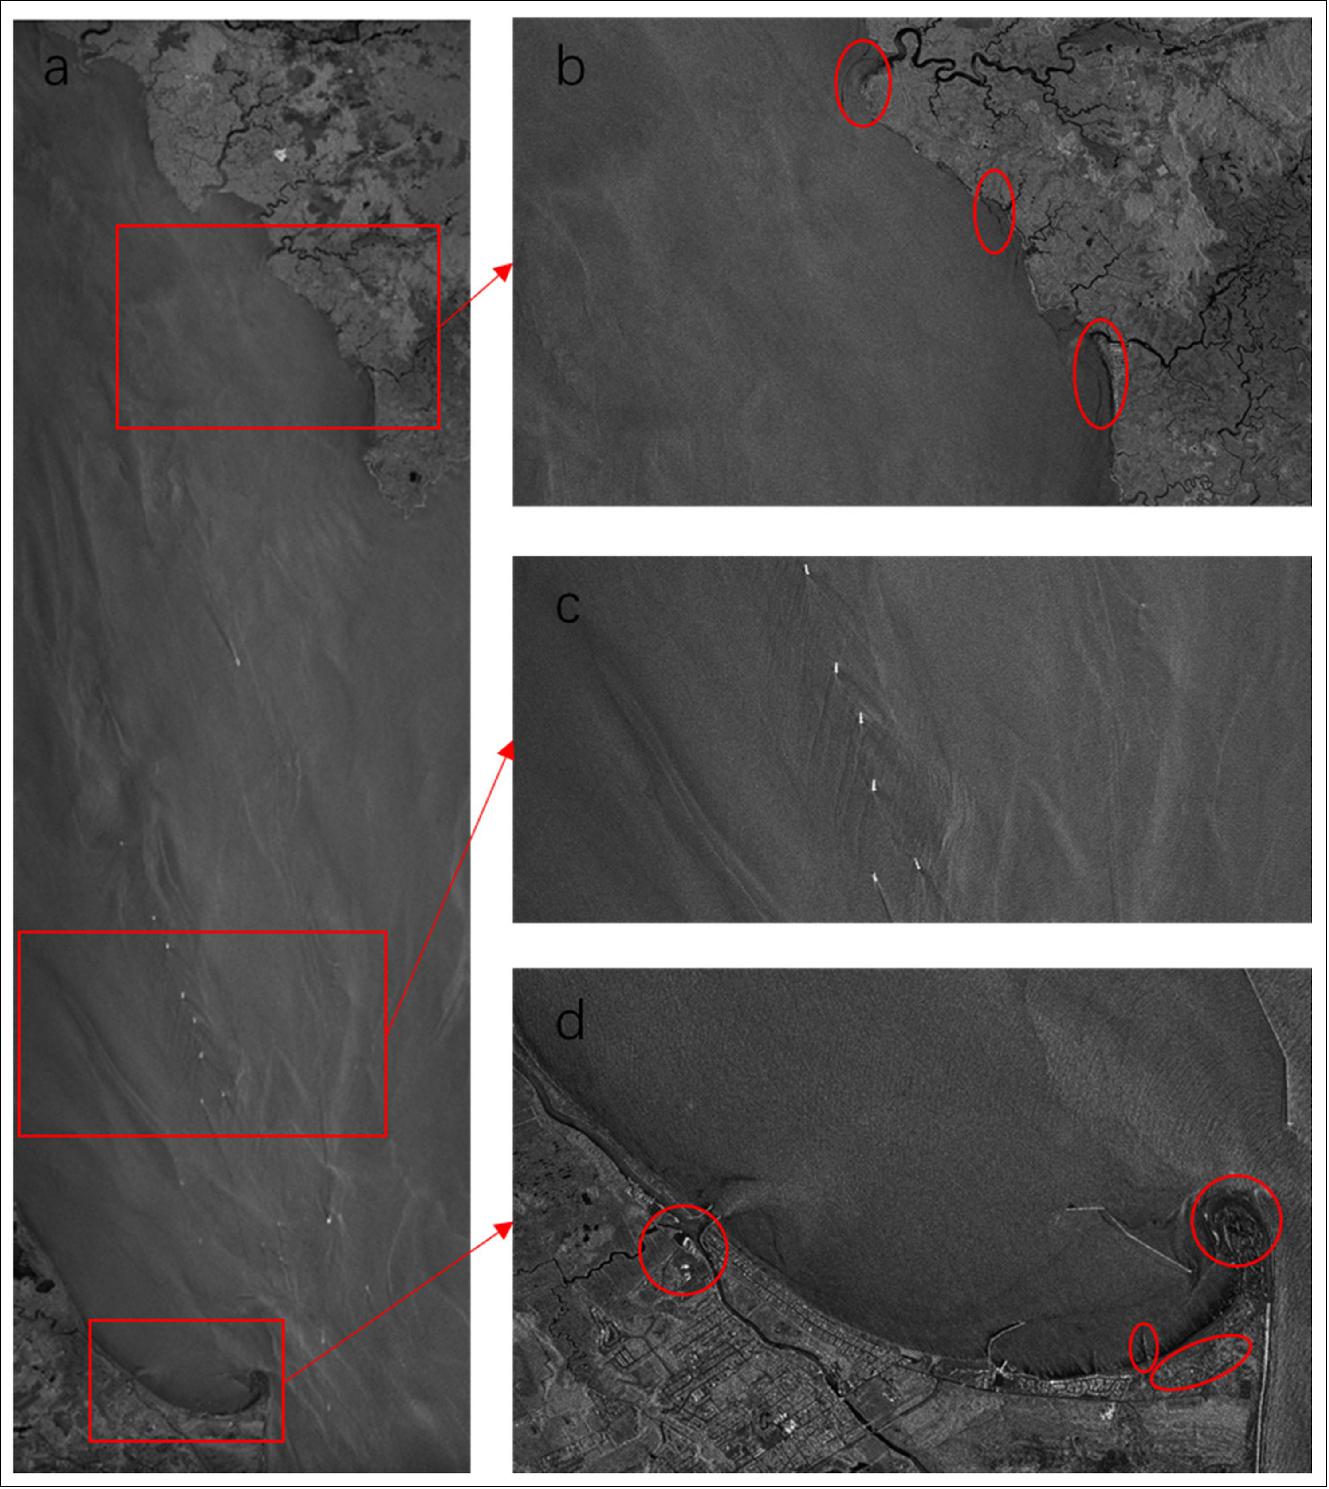 Figure 8: Image of Delaware Bay obtained by striping mode. (a) Whole SAR image of Delaware Bay whose gridding size is 13,996 x 44,480 (horizontal x vertical) and spatial resolution is 3 m. (b) Enlarged view in the top rectangle area in Figure 8a as the arrow points. (c) Enlarged view in the middle rectangle area in Figure 8a as the arrow points. (d) Enlarged view in the bottom rectangle area in Figure 8a as the arrow points (image credit: Xiamen University, University of Delaware)